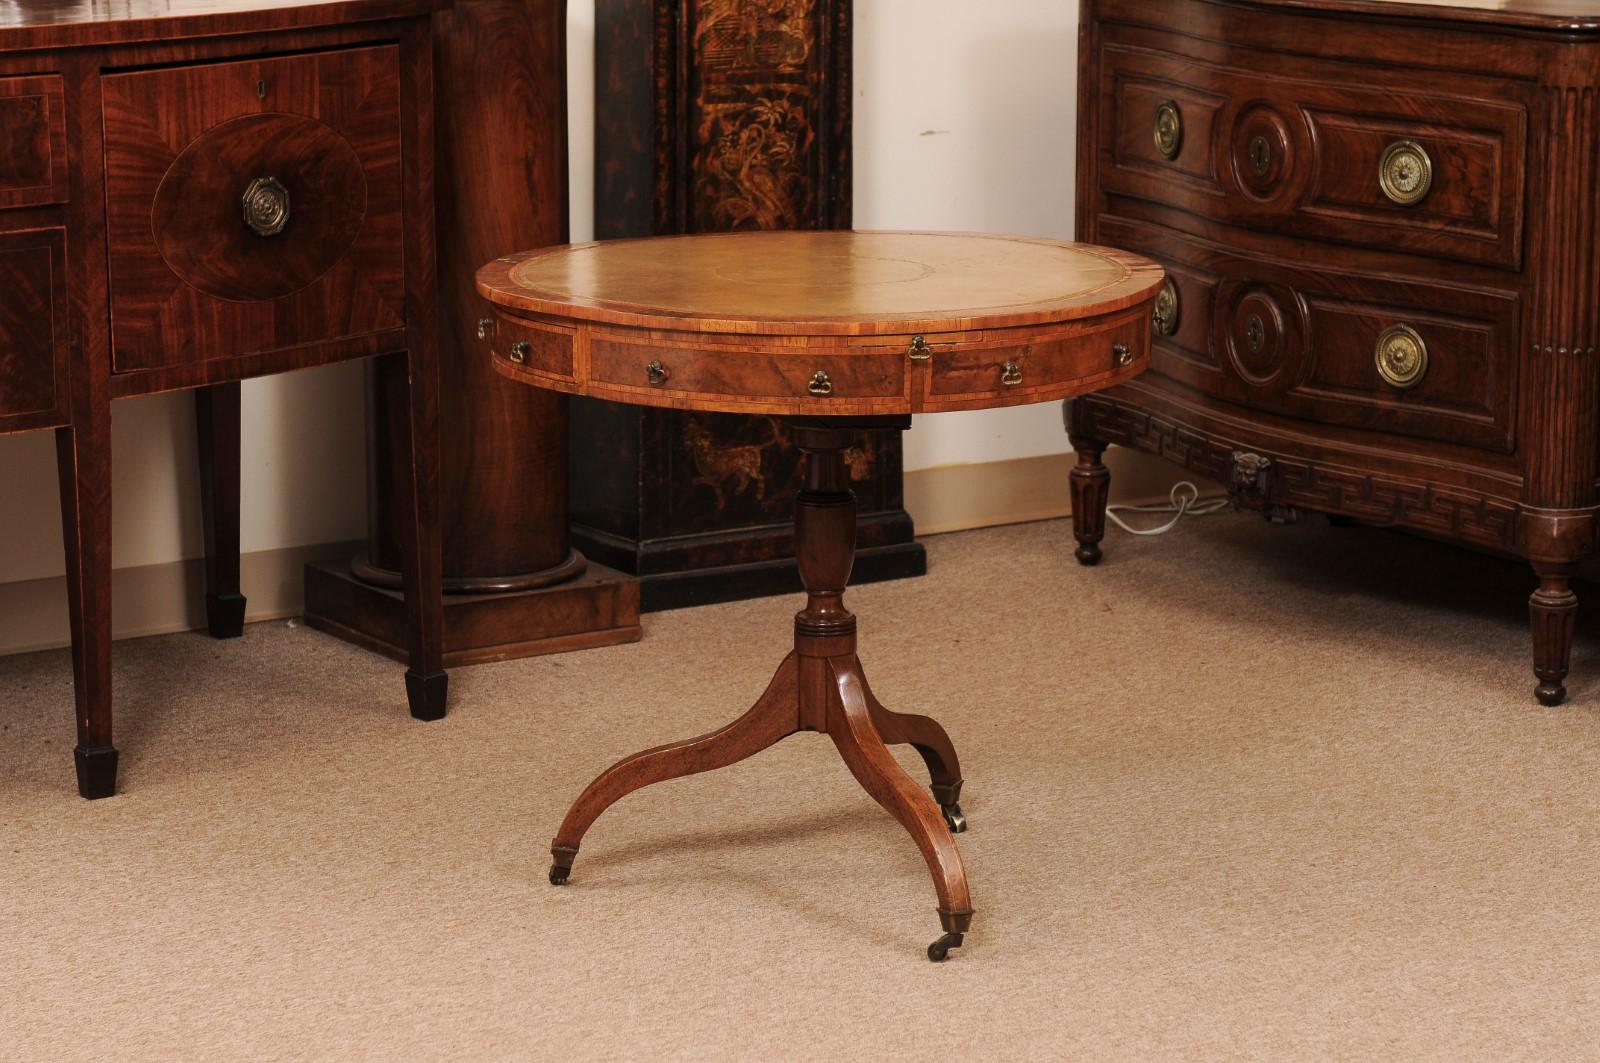 18th Century English Small Mulberry Drum Table with Inlay & Leather Top For Sale 6